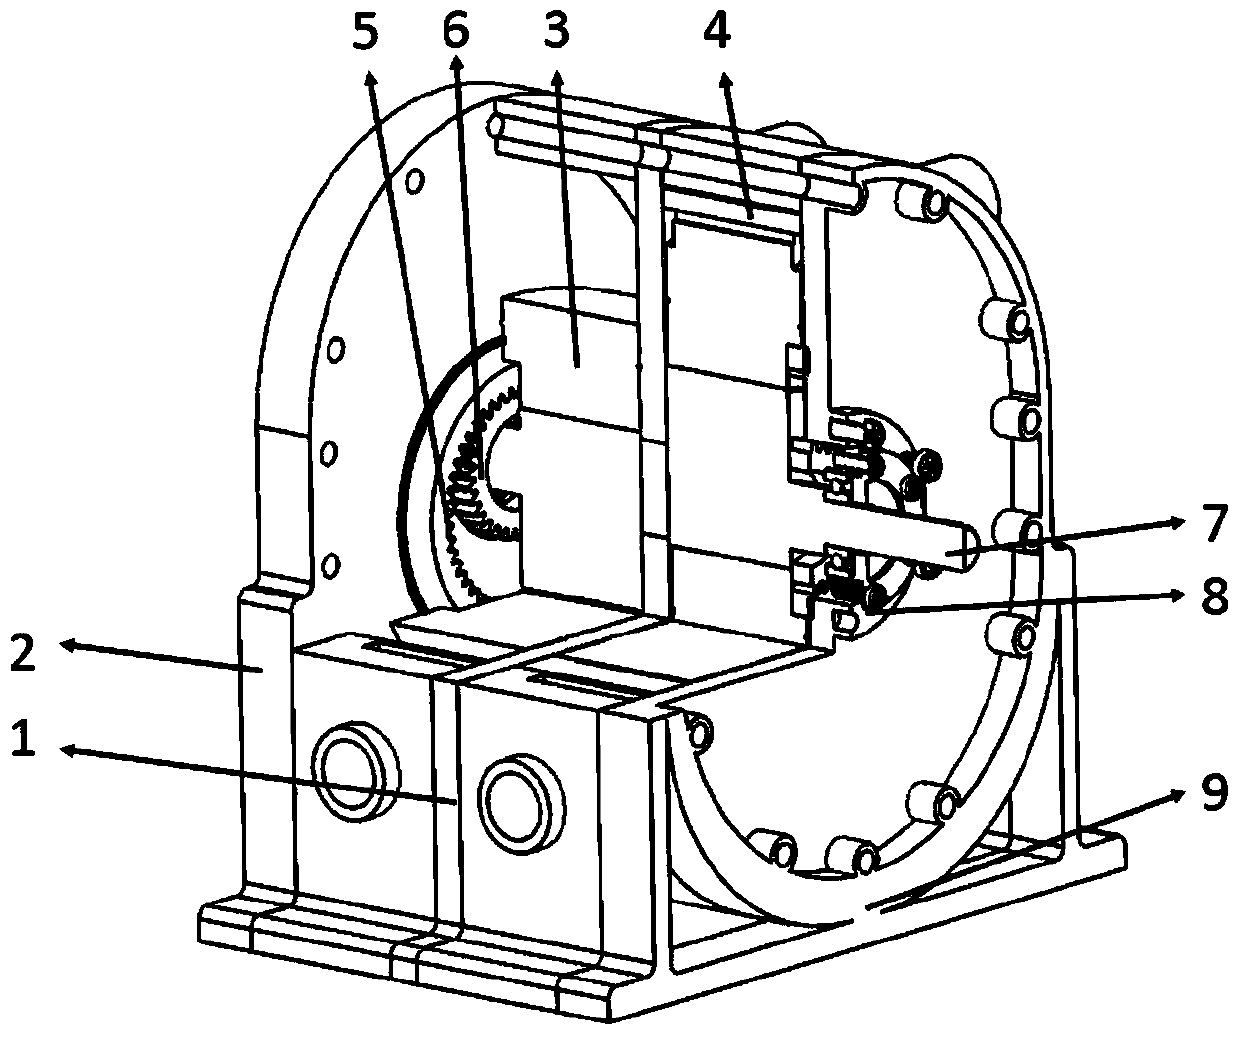 A double-cylinder eccentric rotary pump